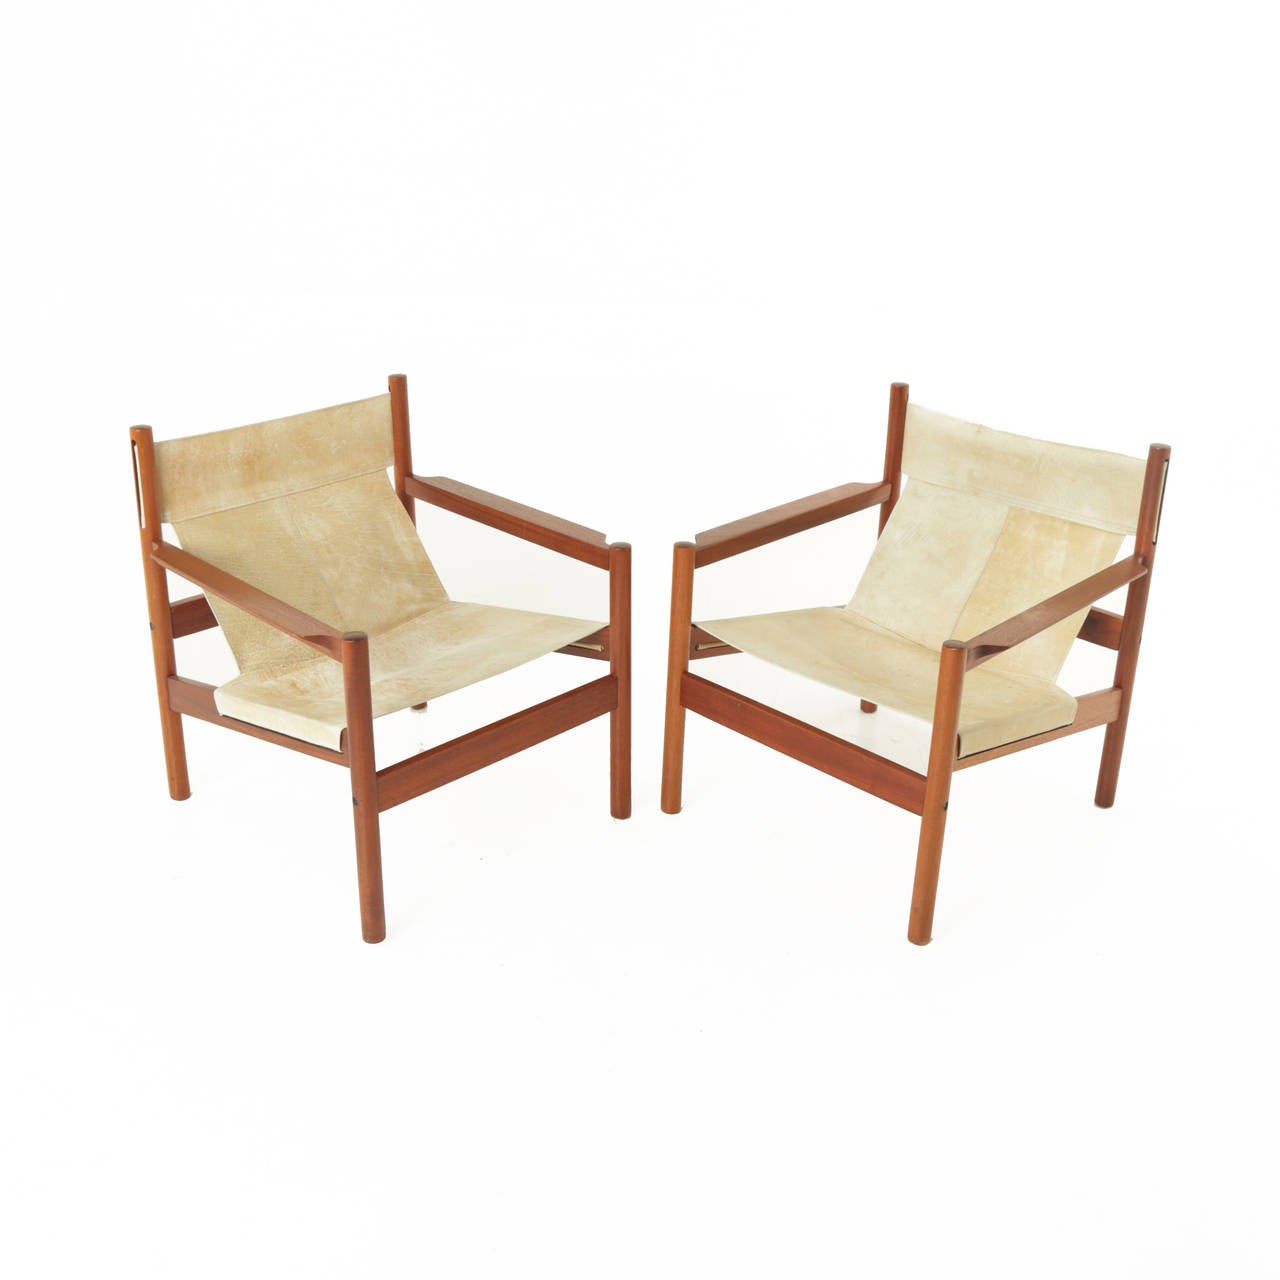 Pair of Roxinho wood and leather sling chairs by Michel Arnoult. The leather is in beautiful aged condition with white stitching.

Seat Depth: 17 in
Seat Width: 23 in

Many pieces are stored in our warehouse, so please click on 